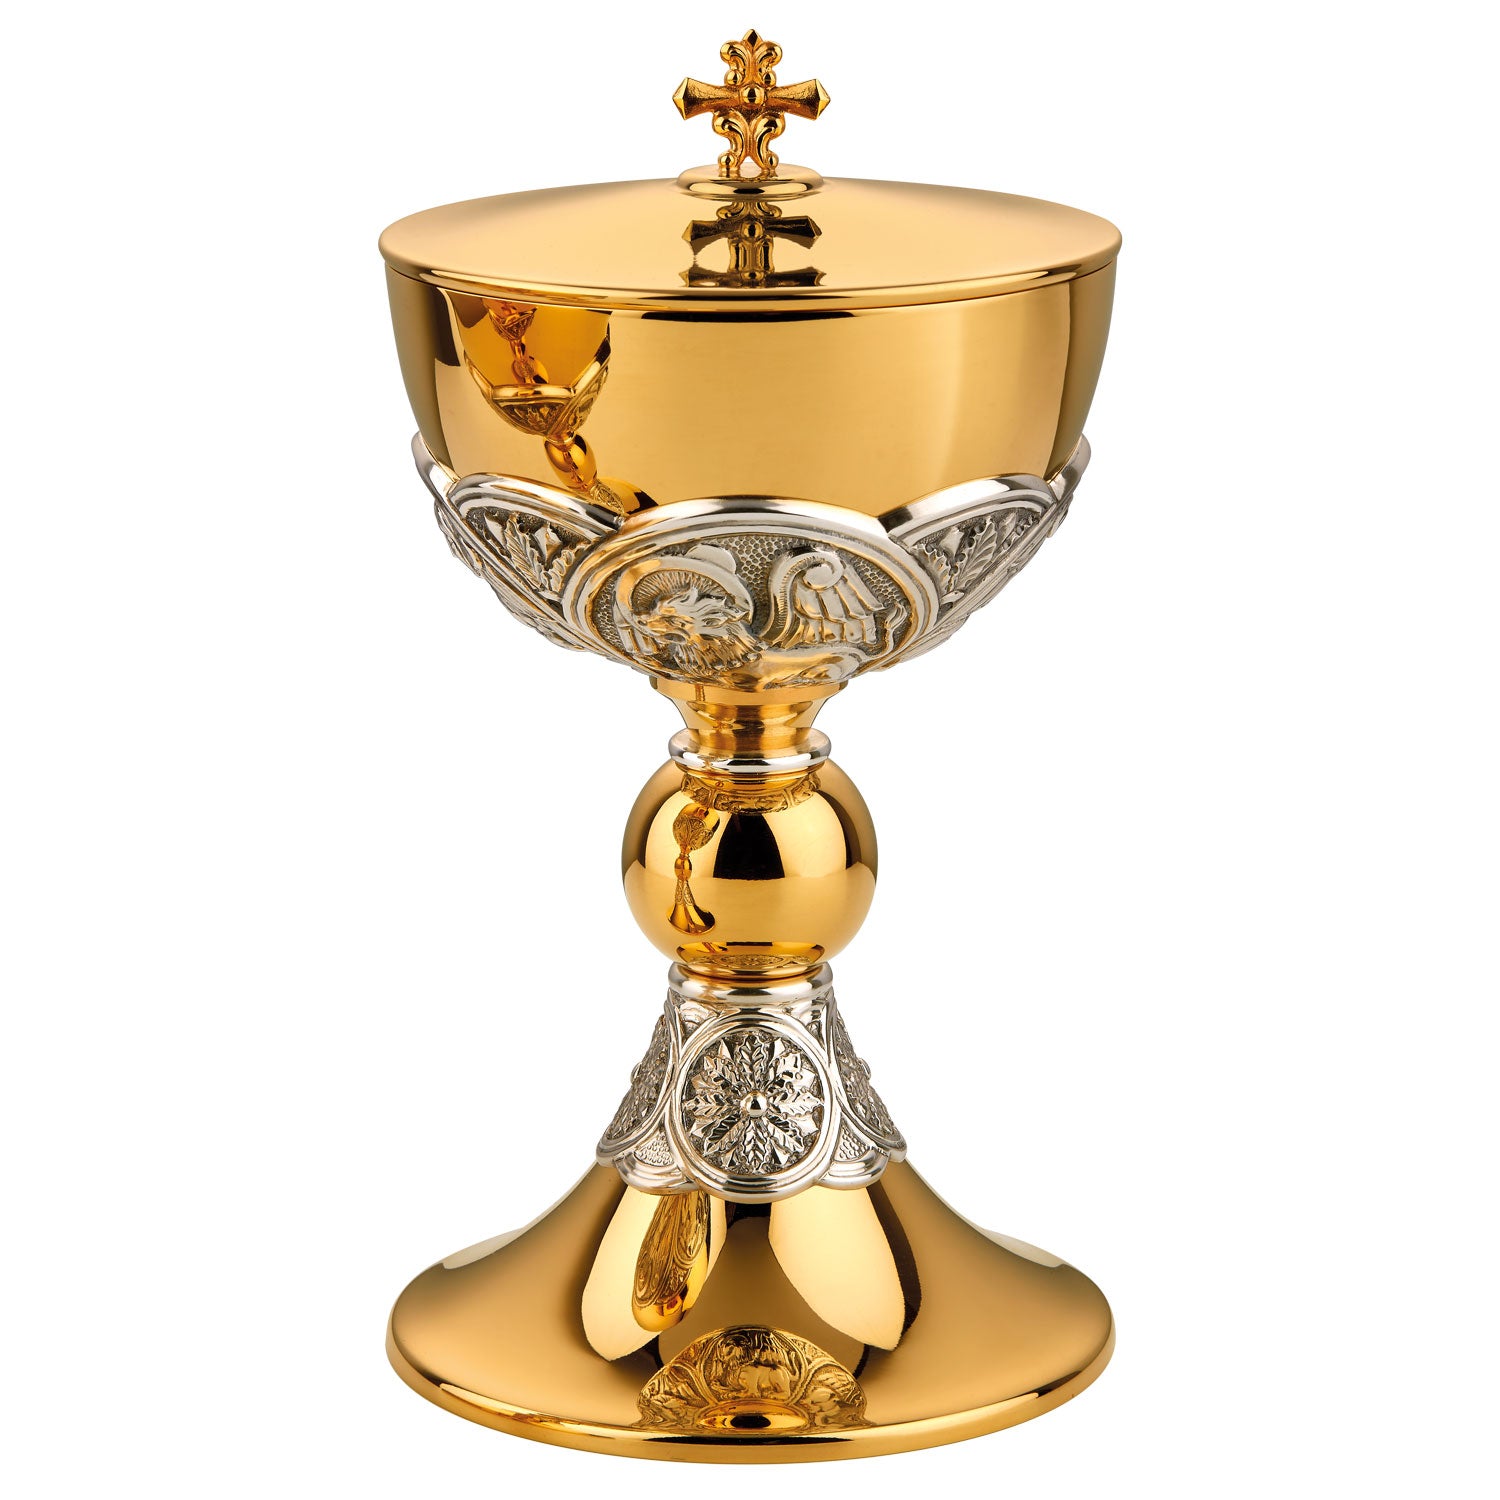 Two Tone Ciborium with Four Evangelists and Floral Motif